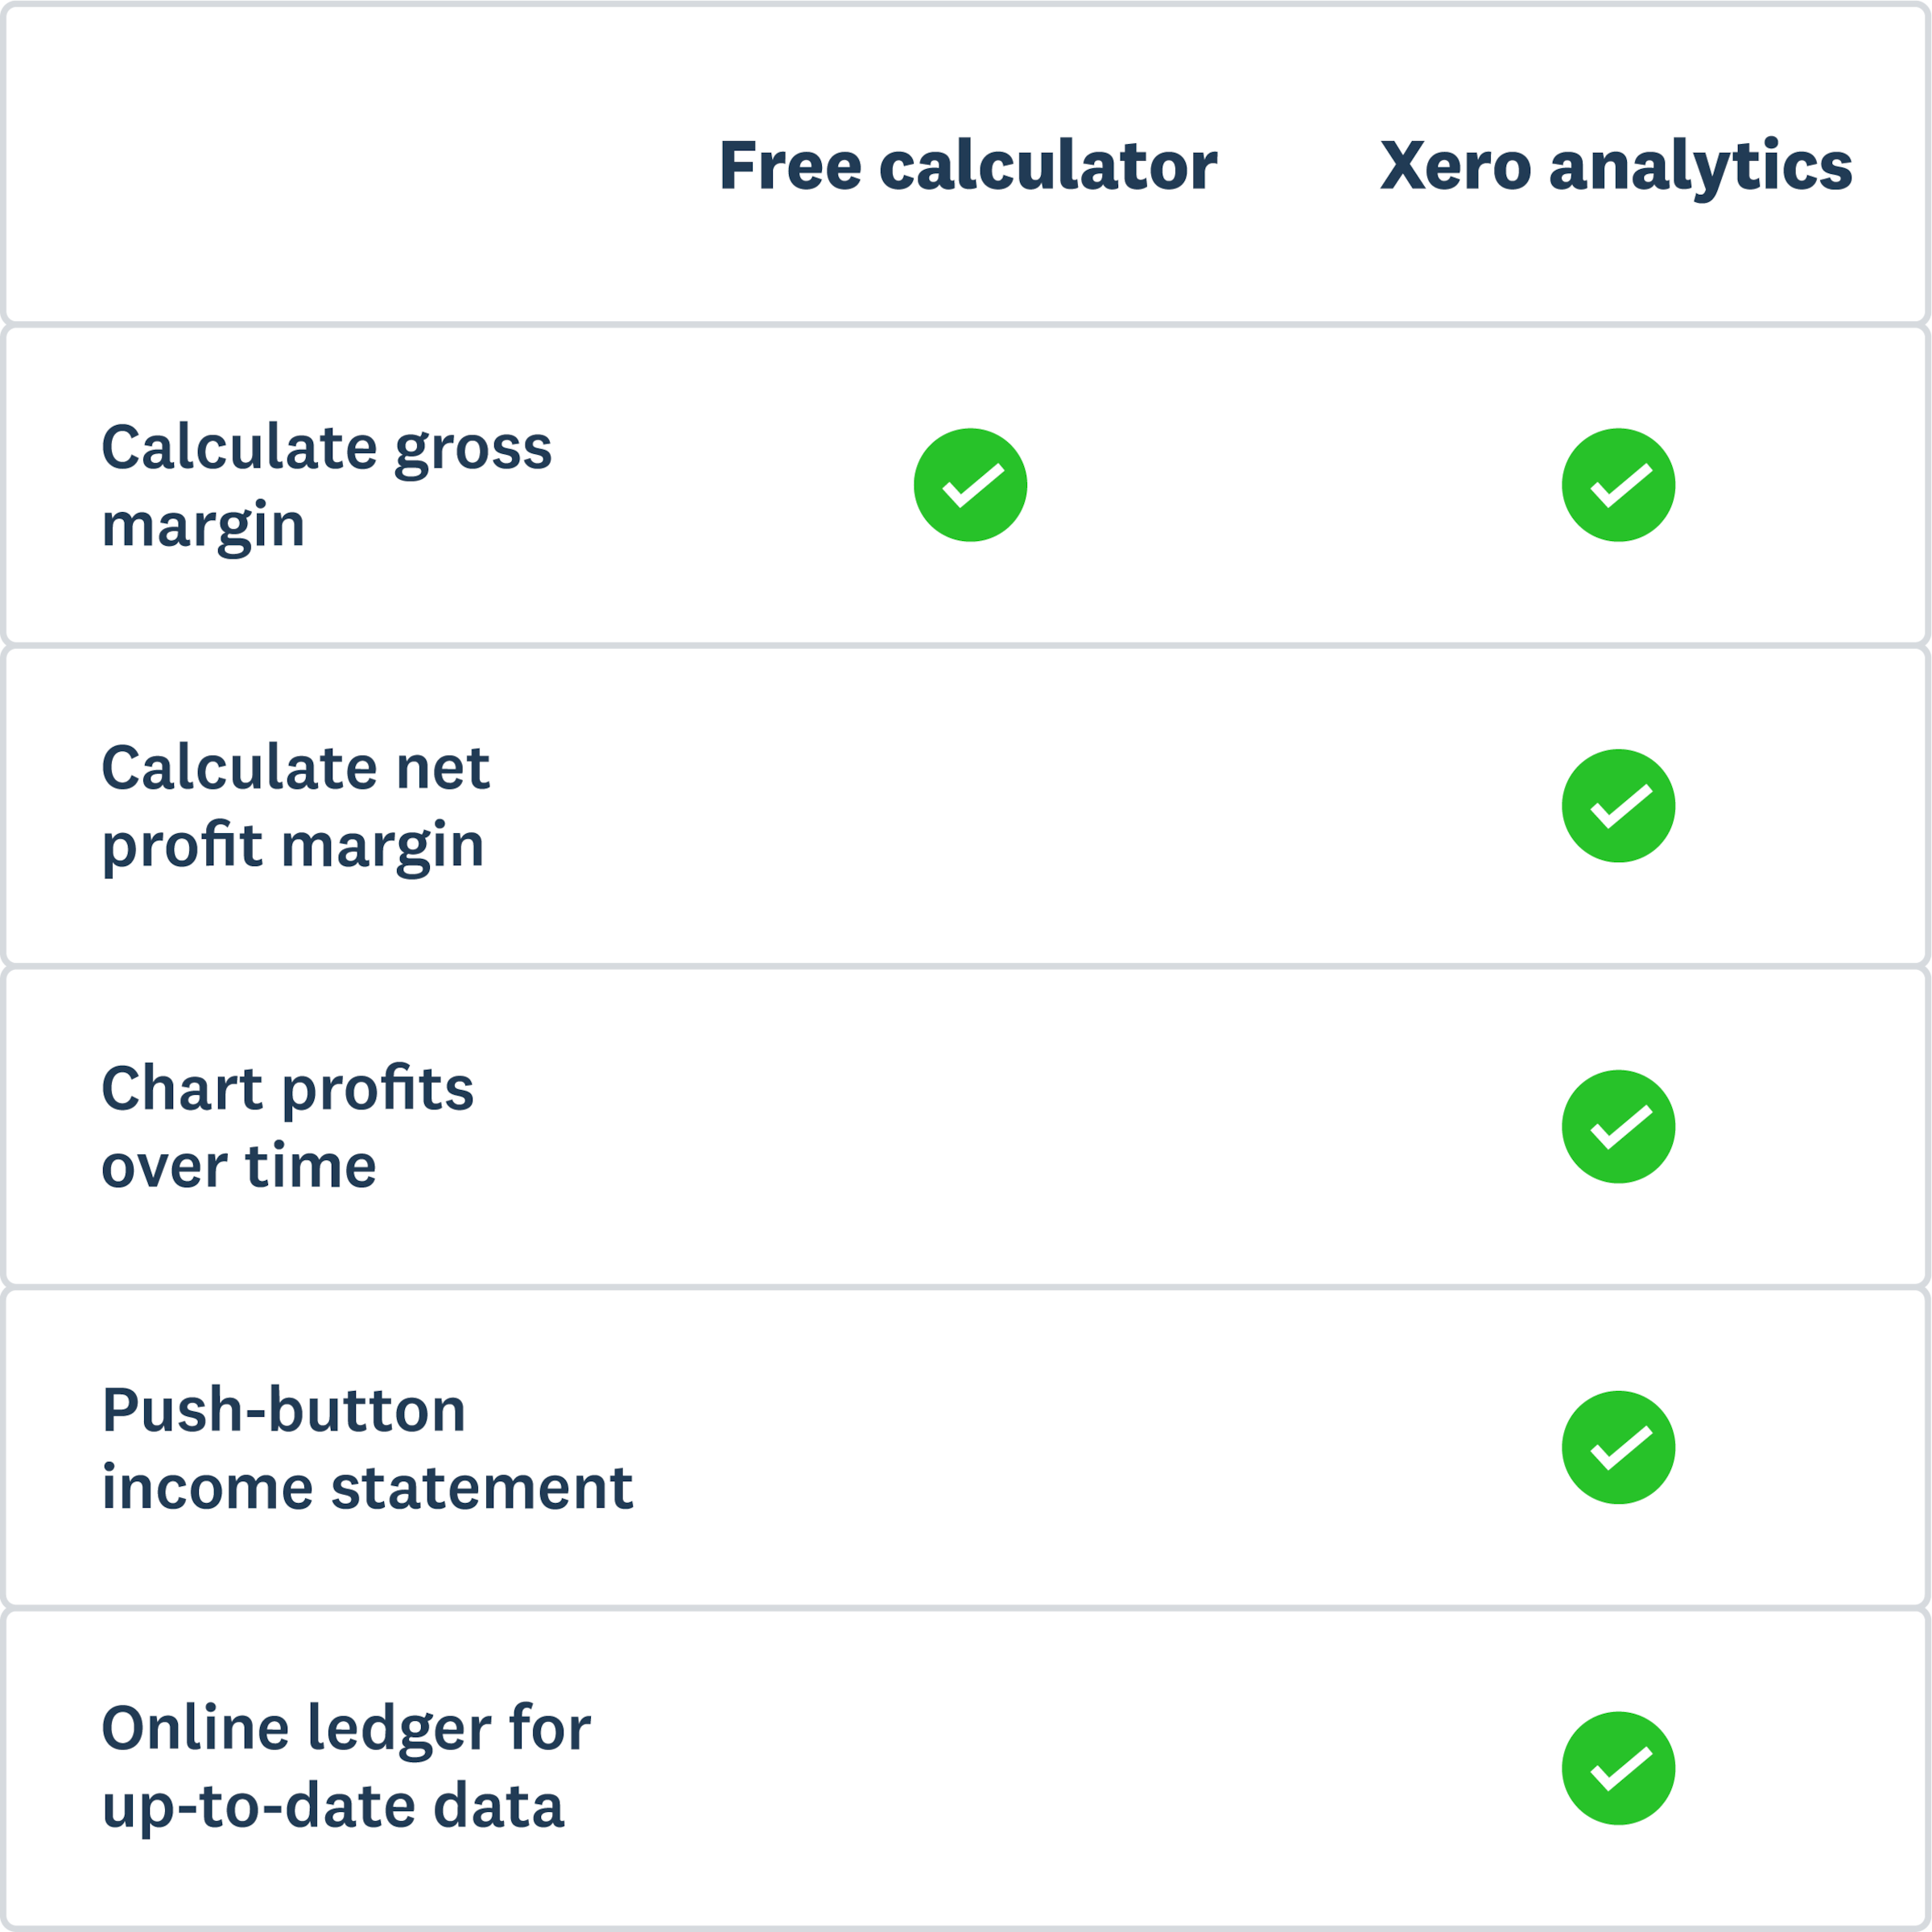 Xero analytics will calculate your gross margin, net profit margin, chart profits over time, push button income statement.